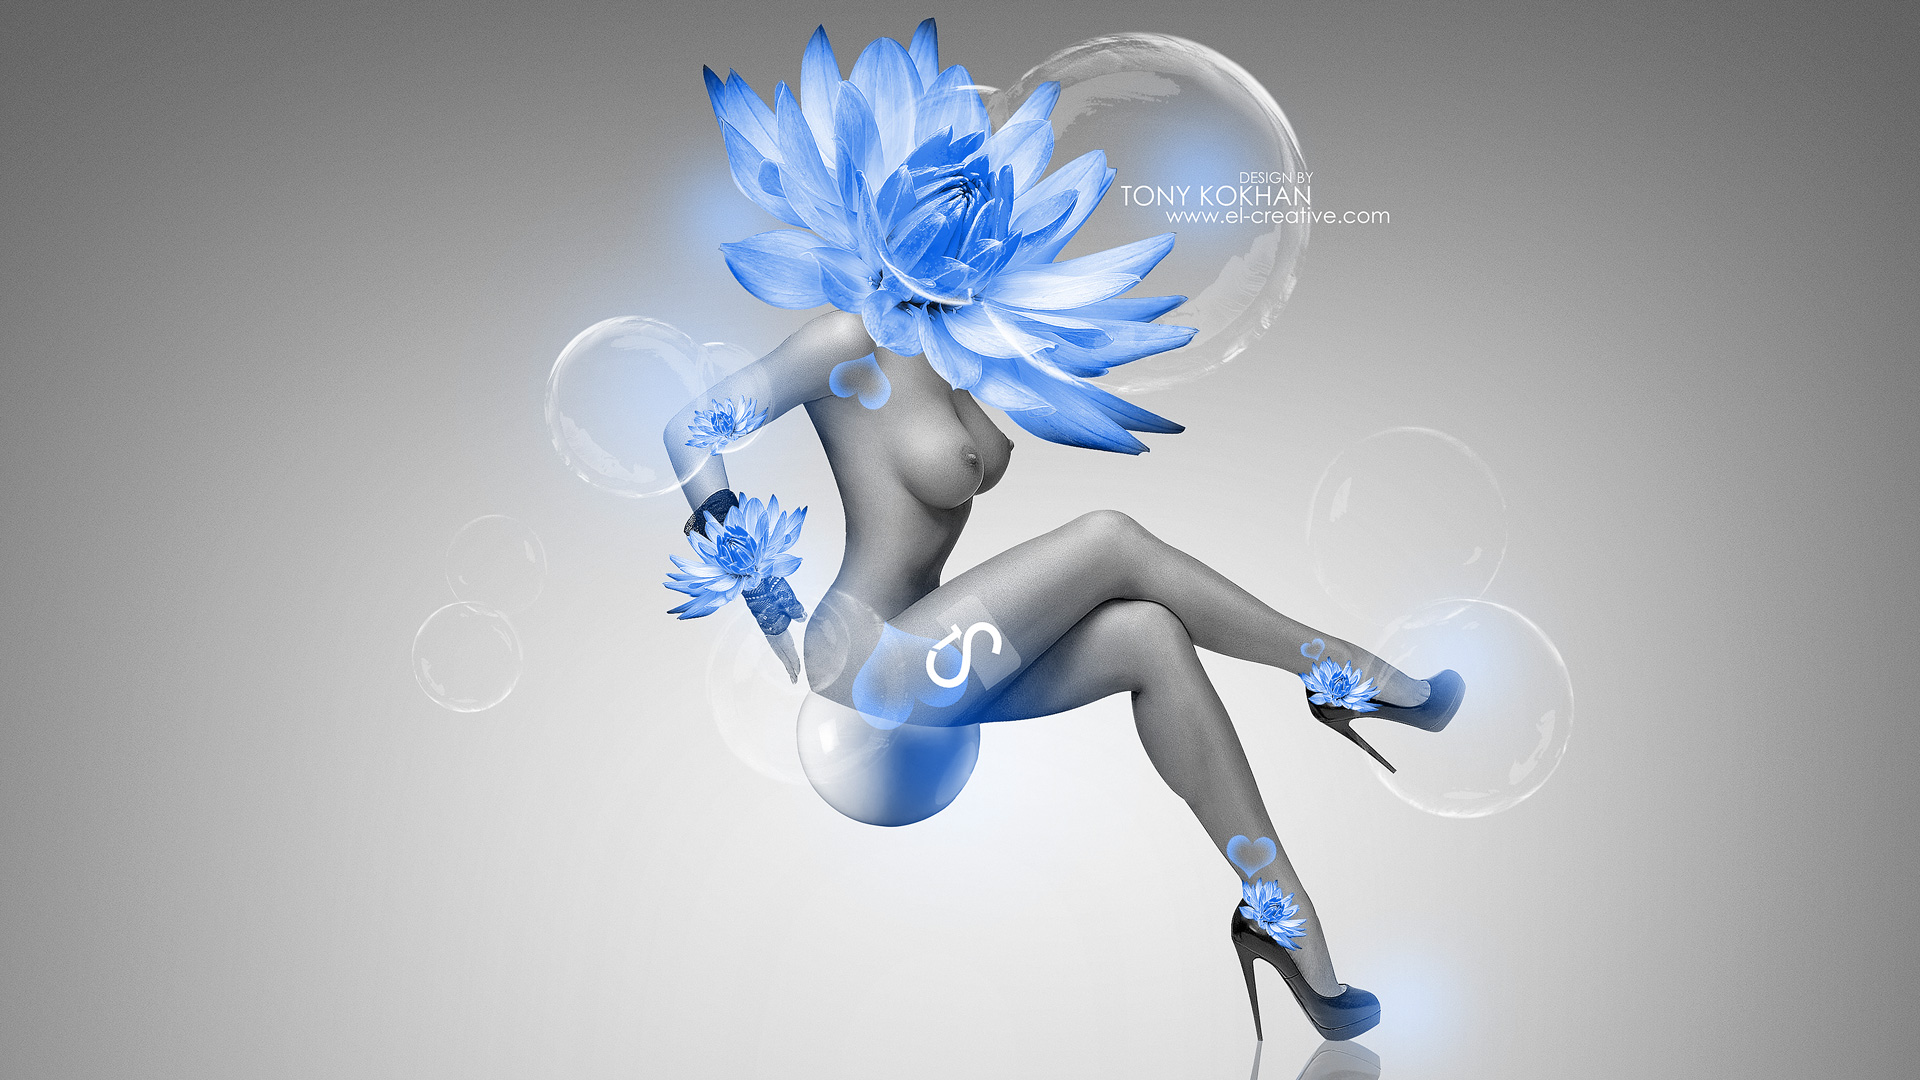  up v1 girl flowers blue neon hd wallpapers by tony Car Pictures